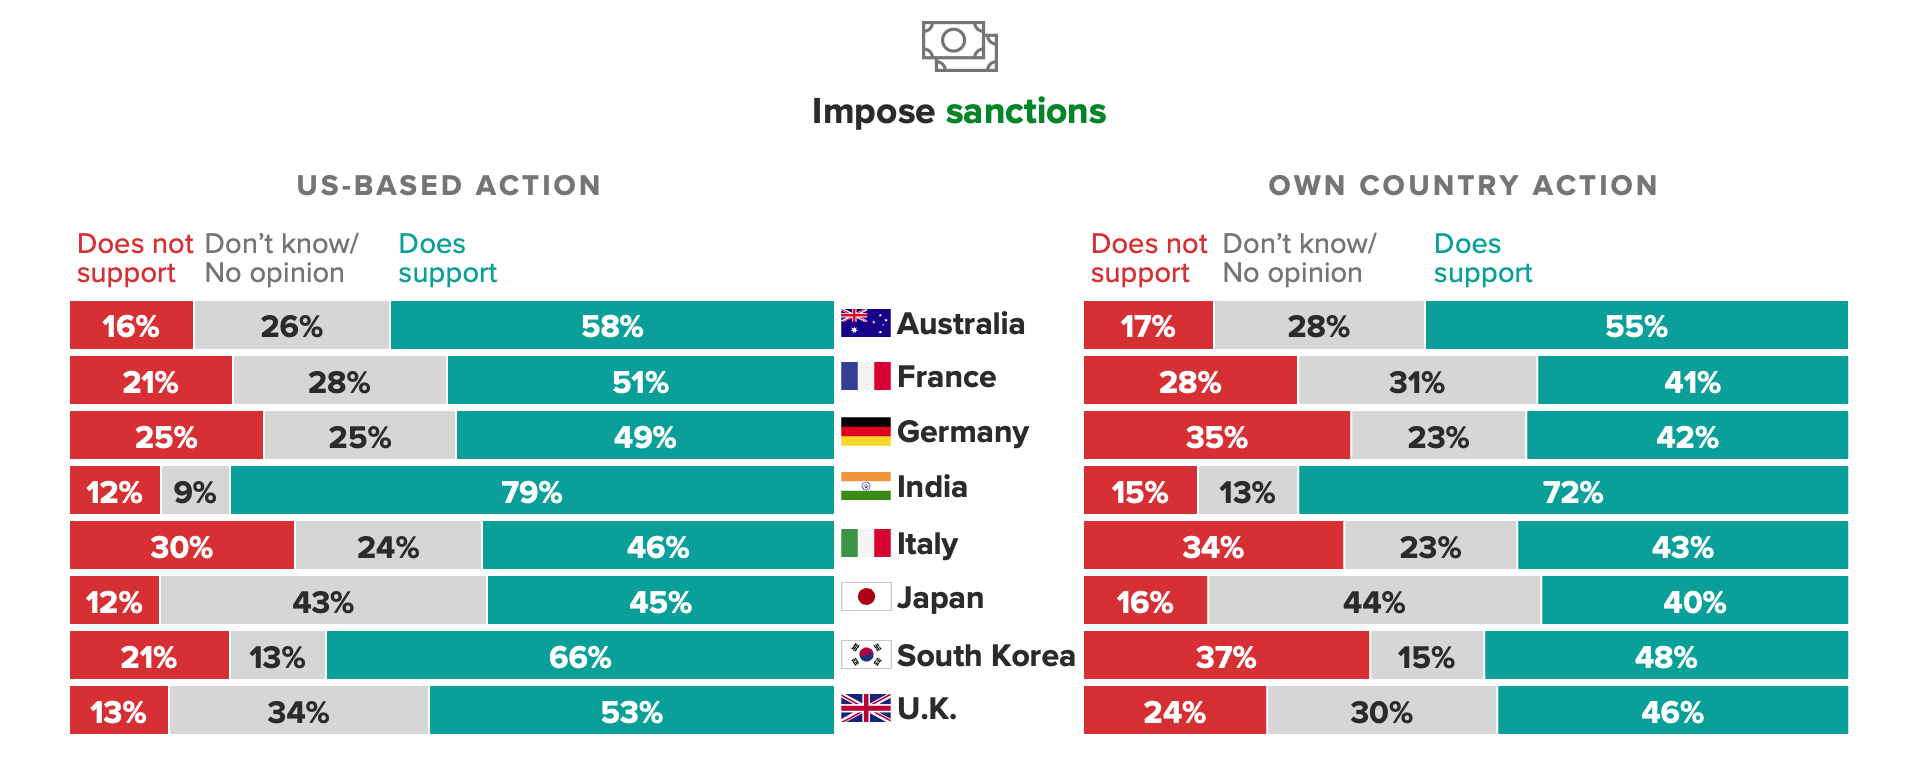 Bar charts showing Public support in U.S. allied countries for imposing sanctions if China invades Taiwan